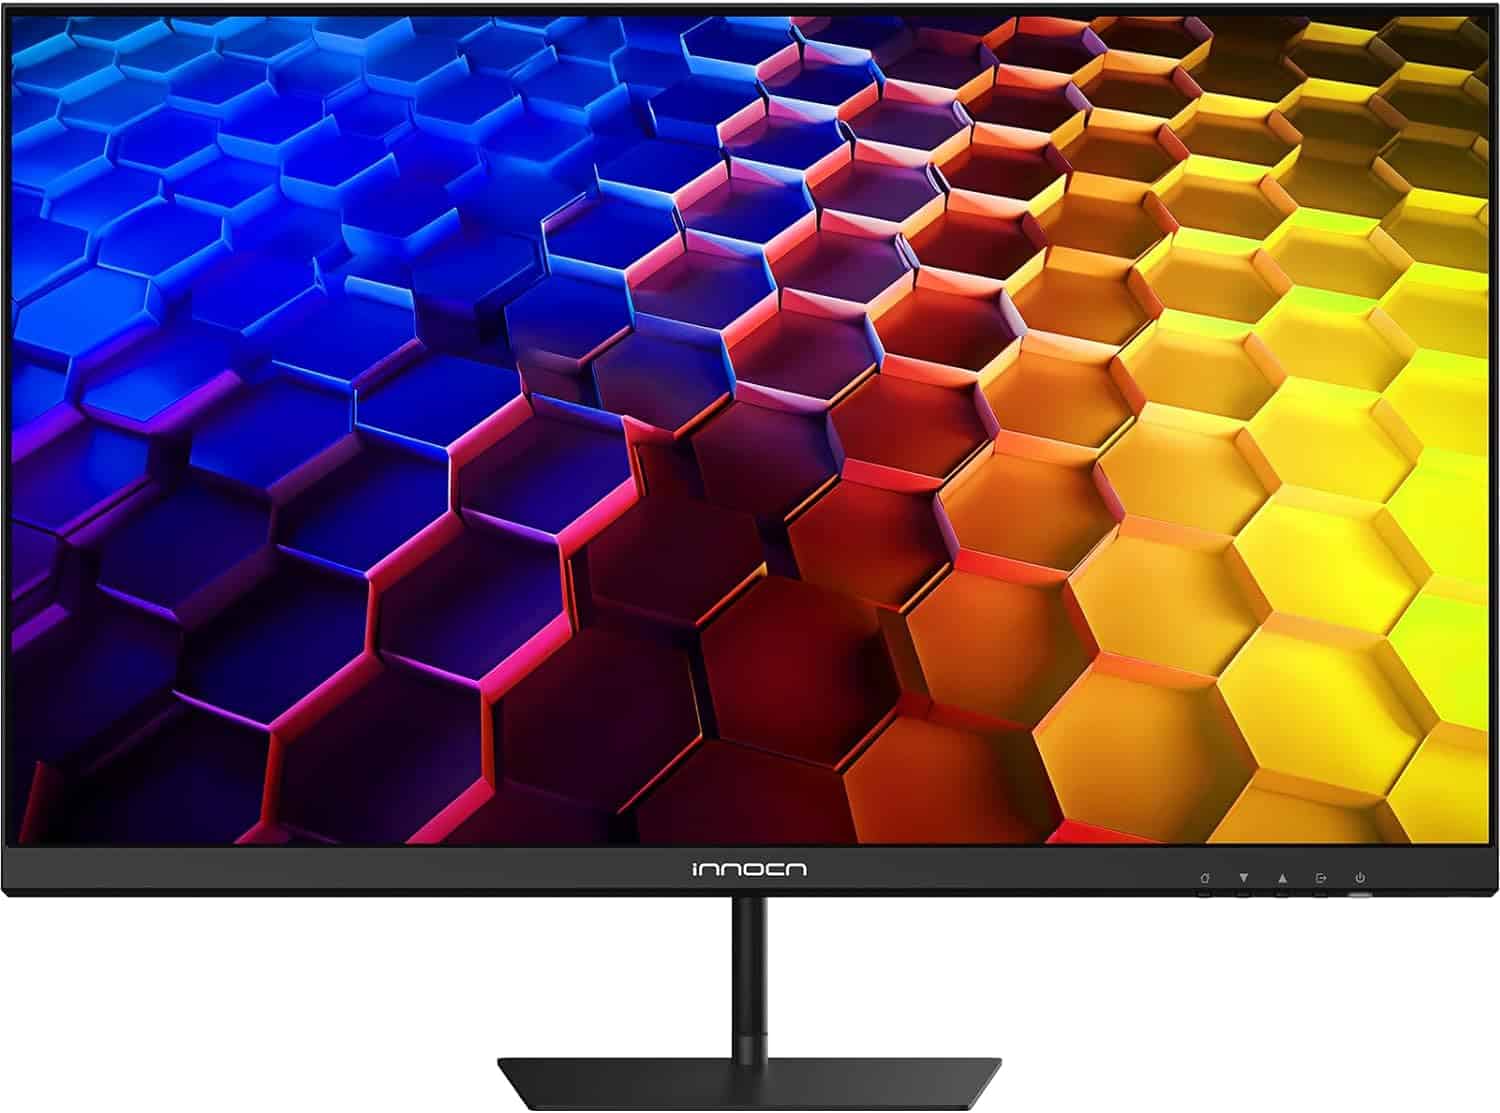 Should I buy a 4K monitor and downscale to 1440p or just get a 1440p monitor?  - GadgetMates